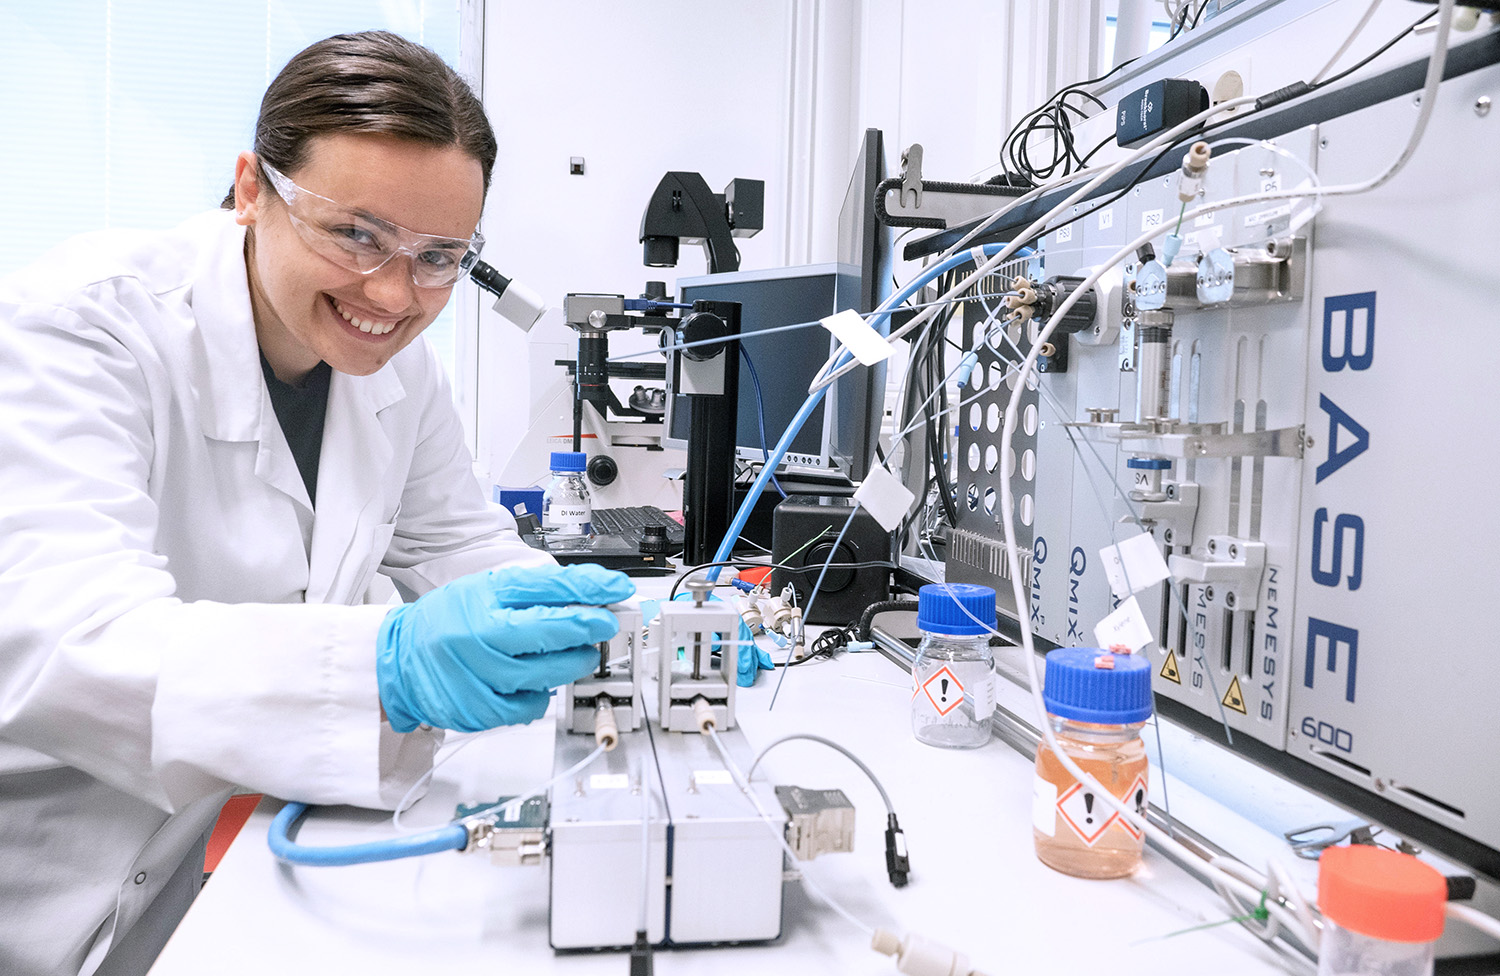 A smiling woman working in a laboratory. Photo